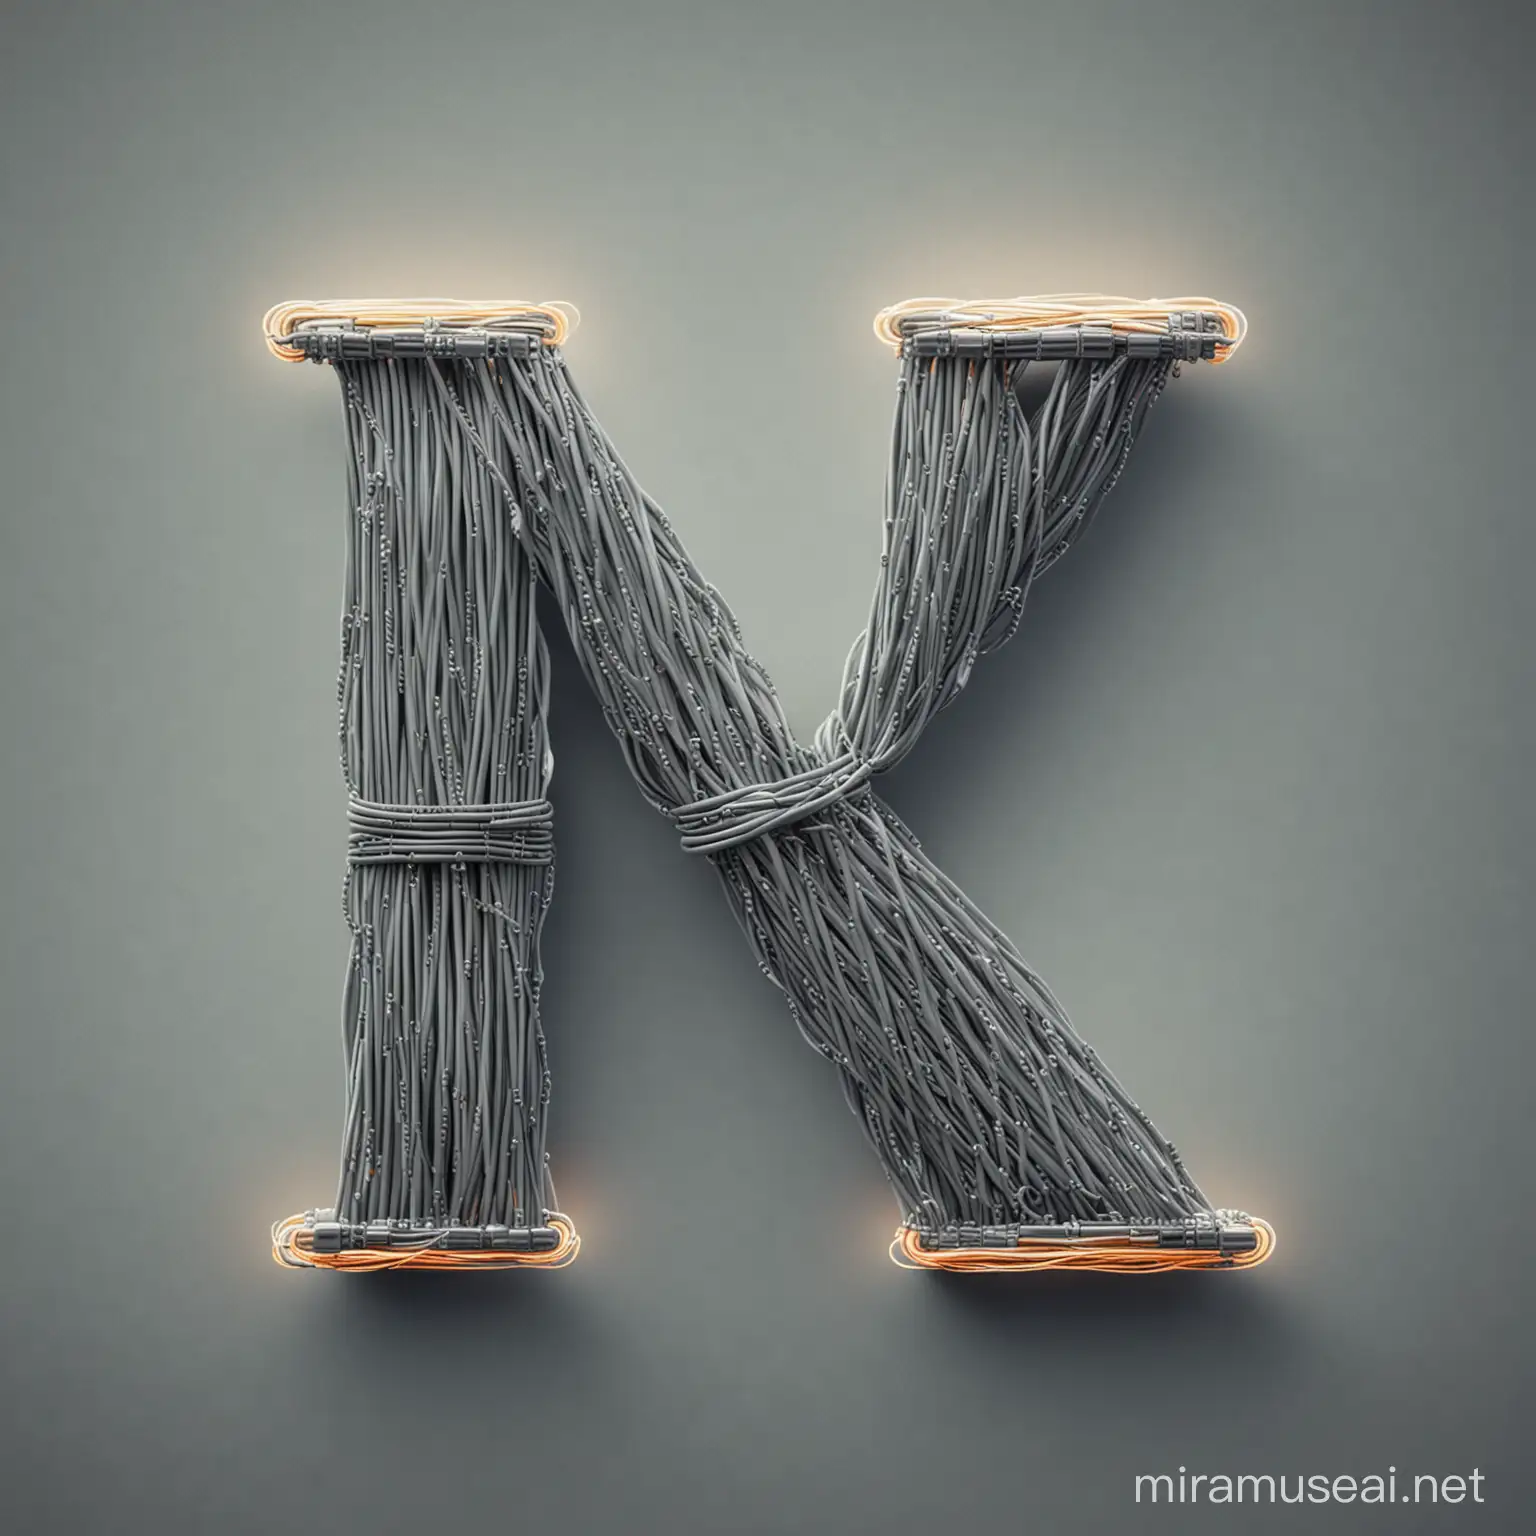 Letter N made of Electric cables